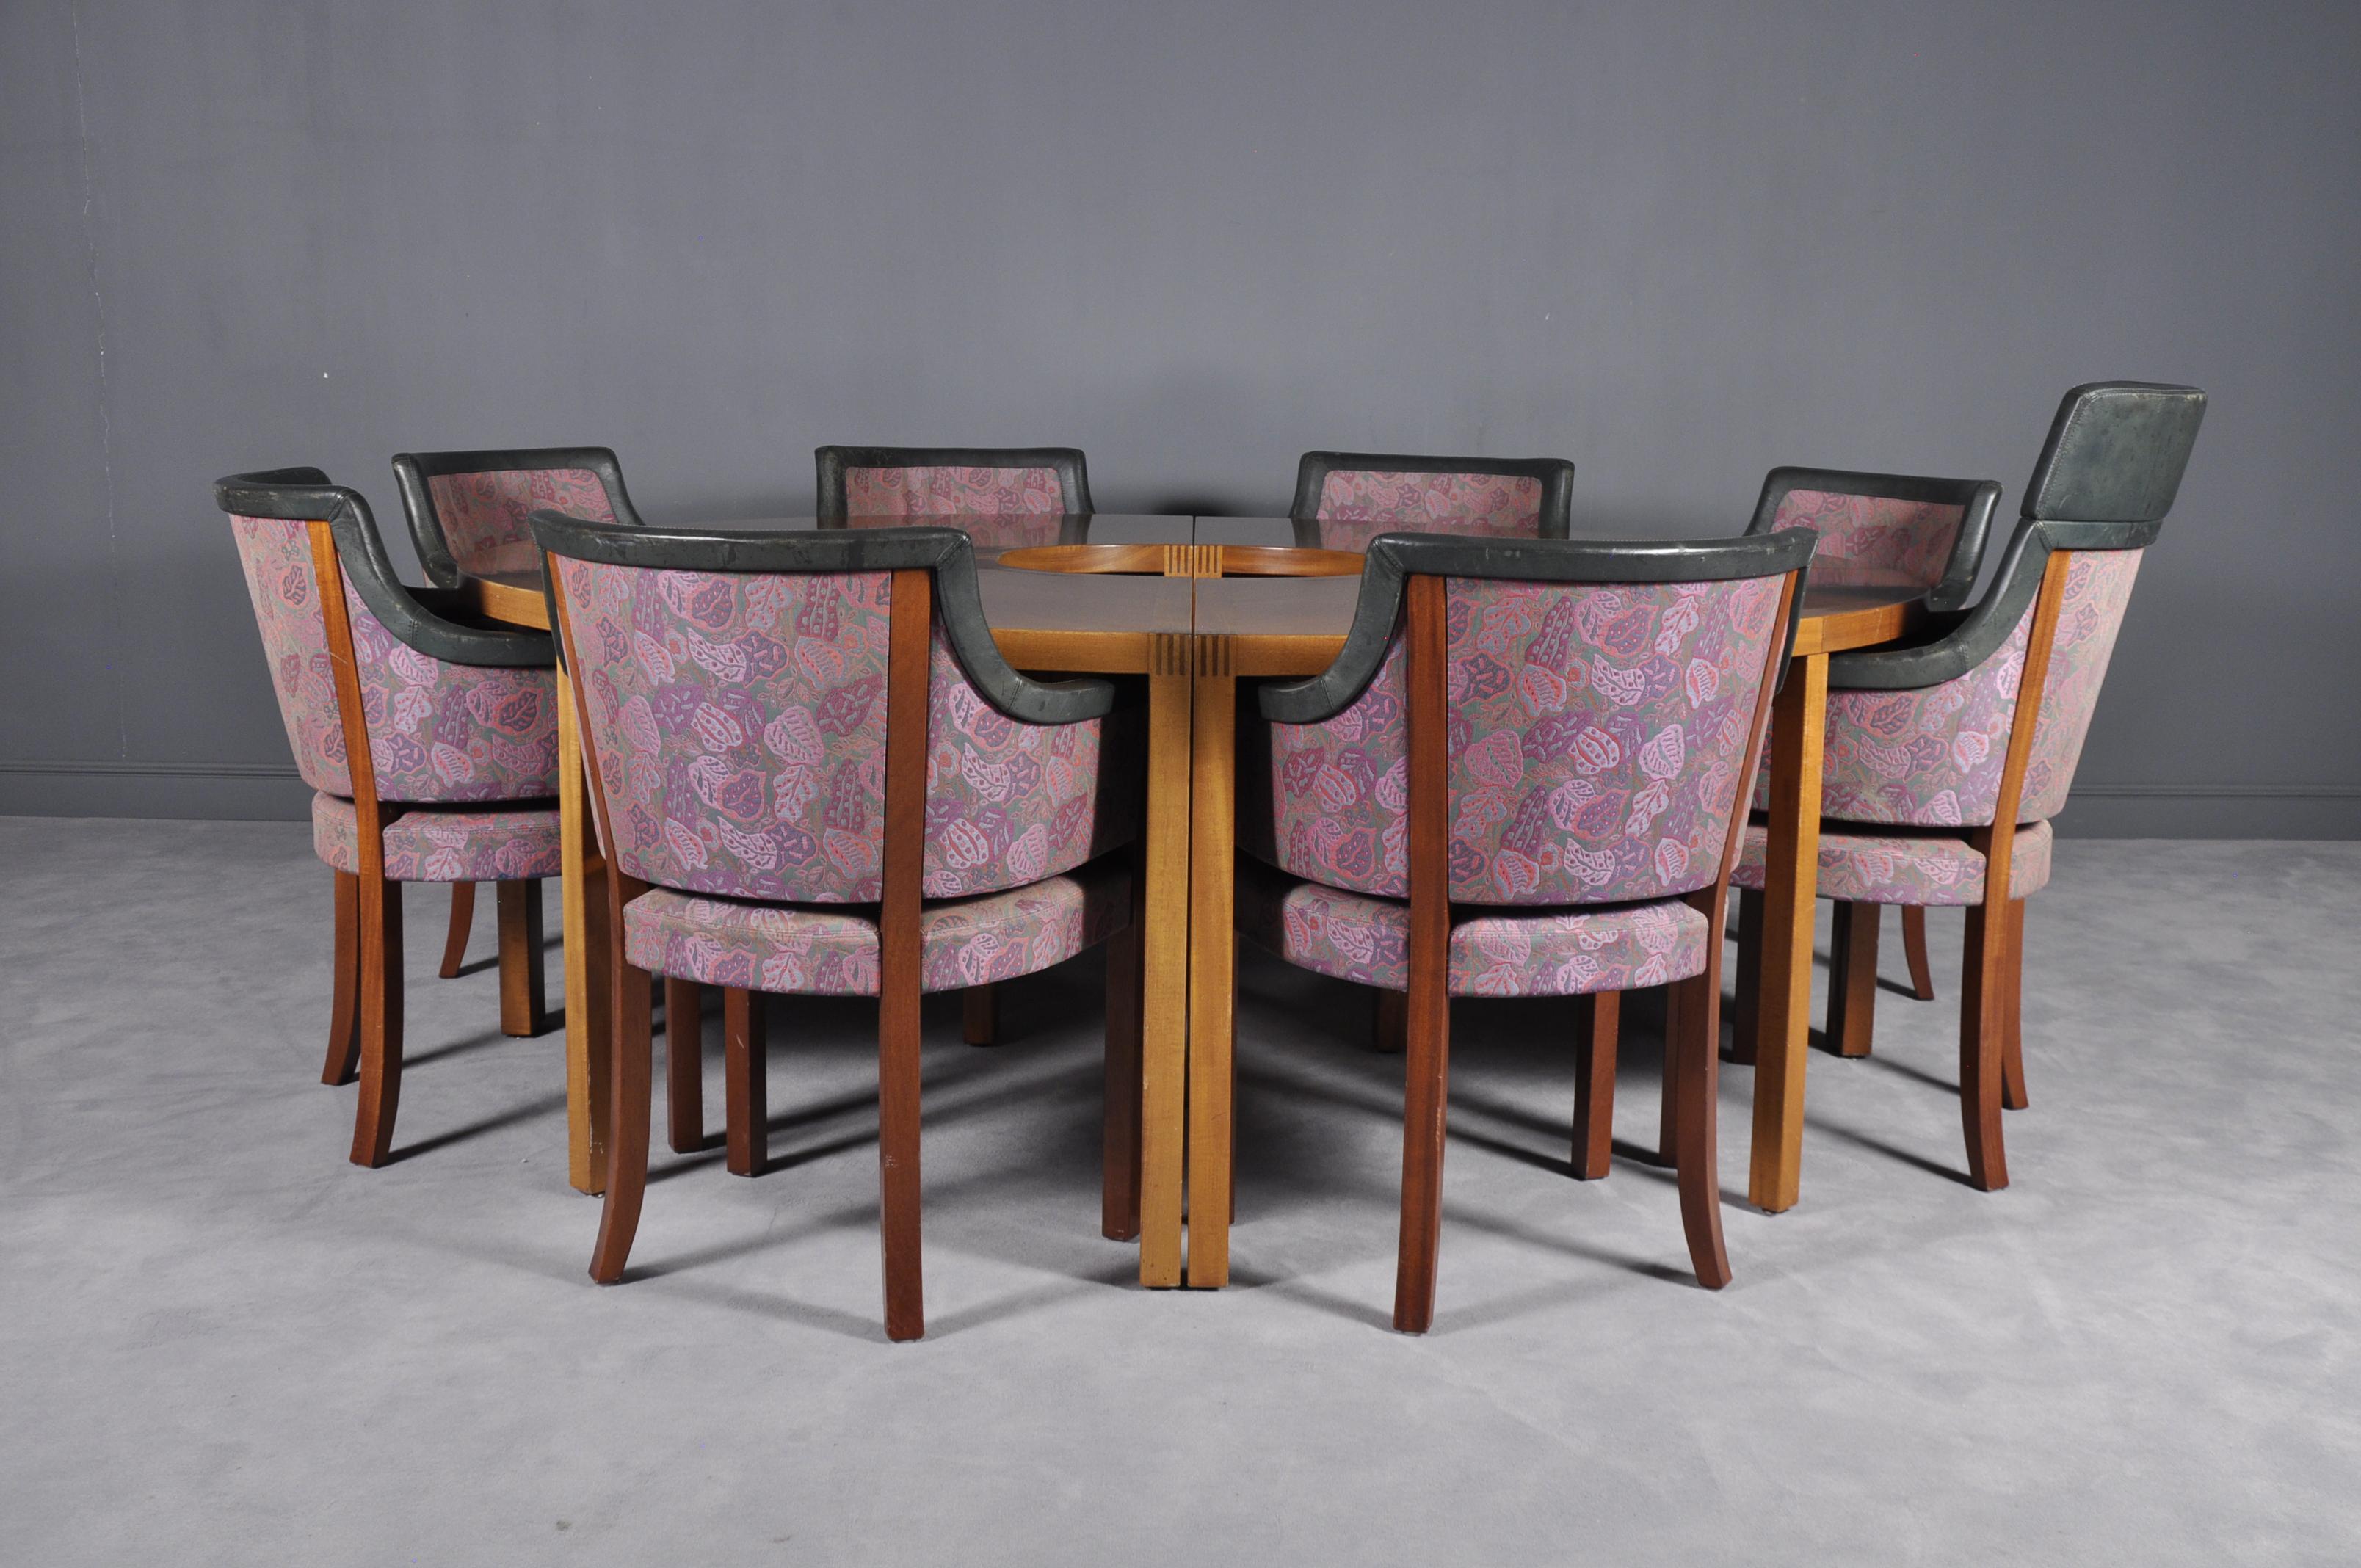 Late 20th Century Conference Table and Eight “Riksdagen” Chairs by Åke Axelsson for Gärsnäs, 1981 For Sale